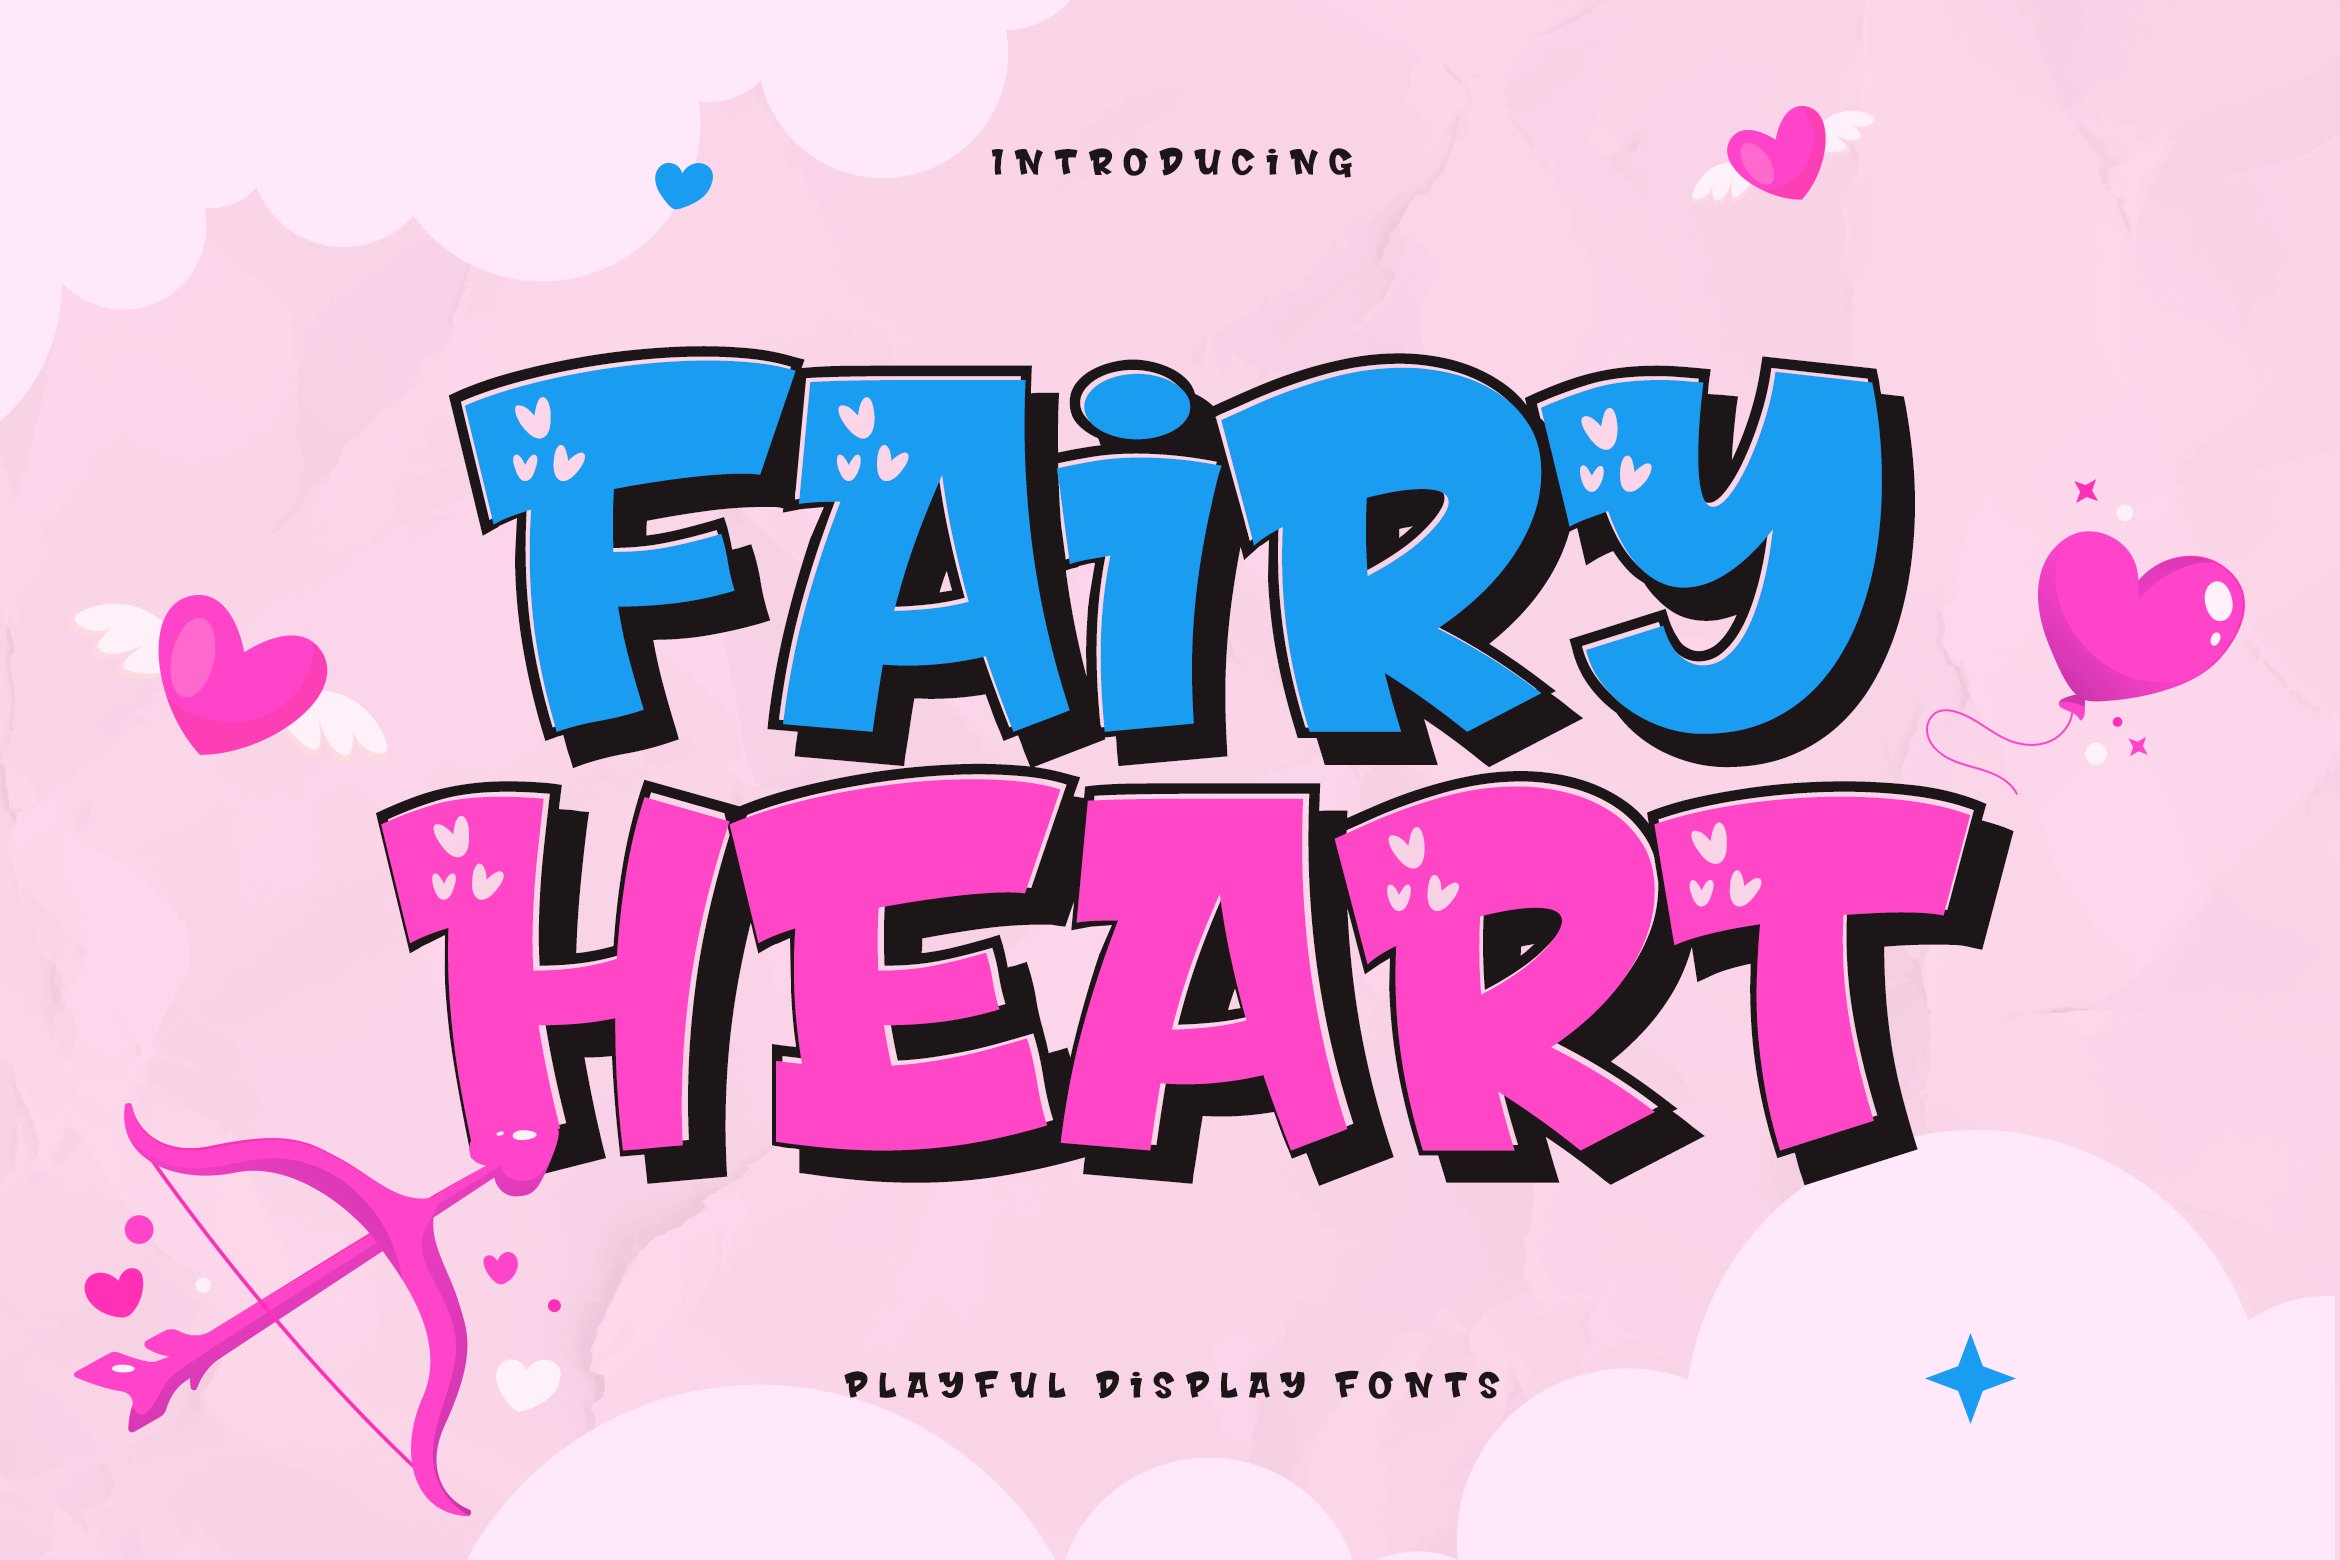 Fairy Heart Lovely Display Fonts cover image.